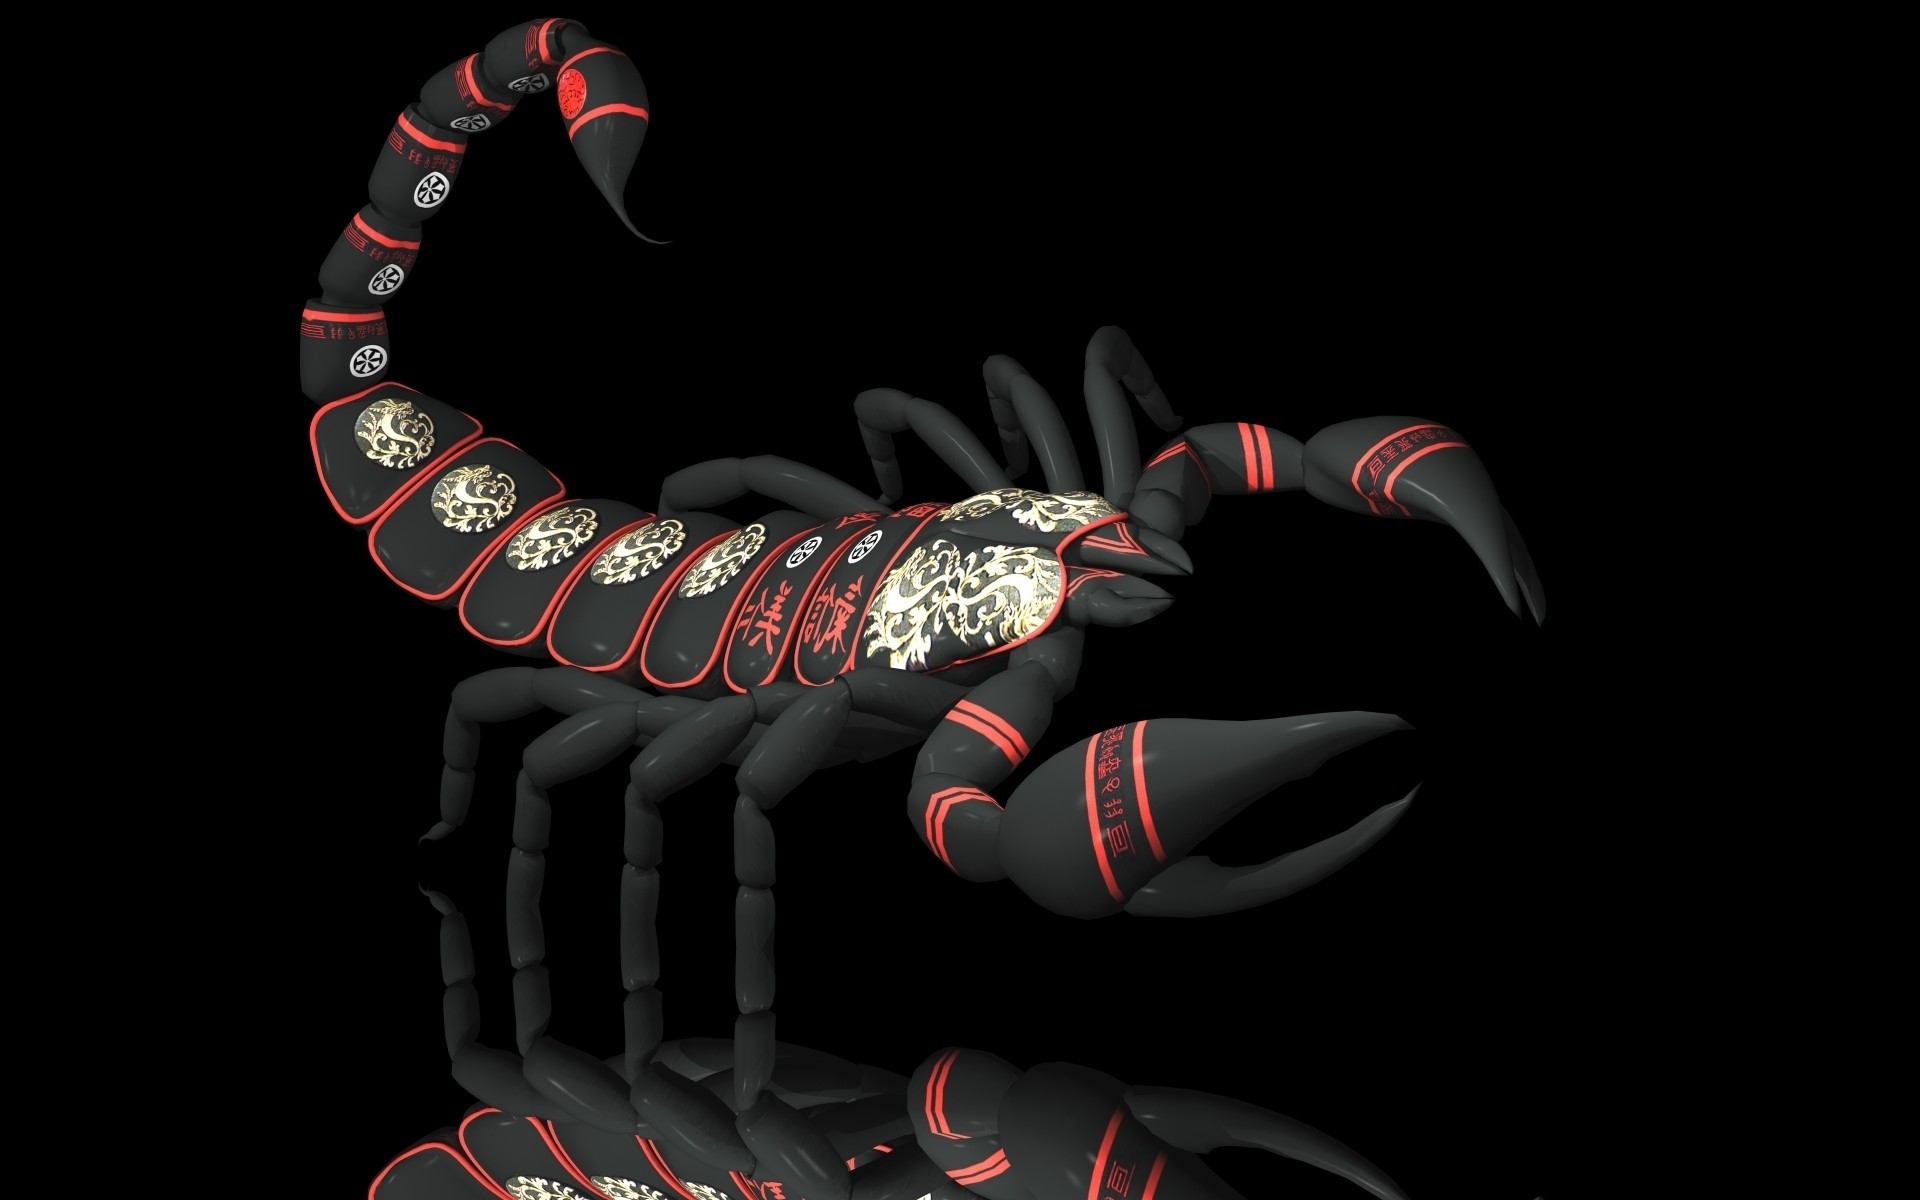 1920x1200 ... scorpio wide hd wallpaper free images artwork cool images ...